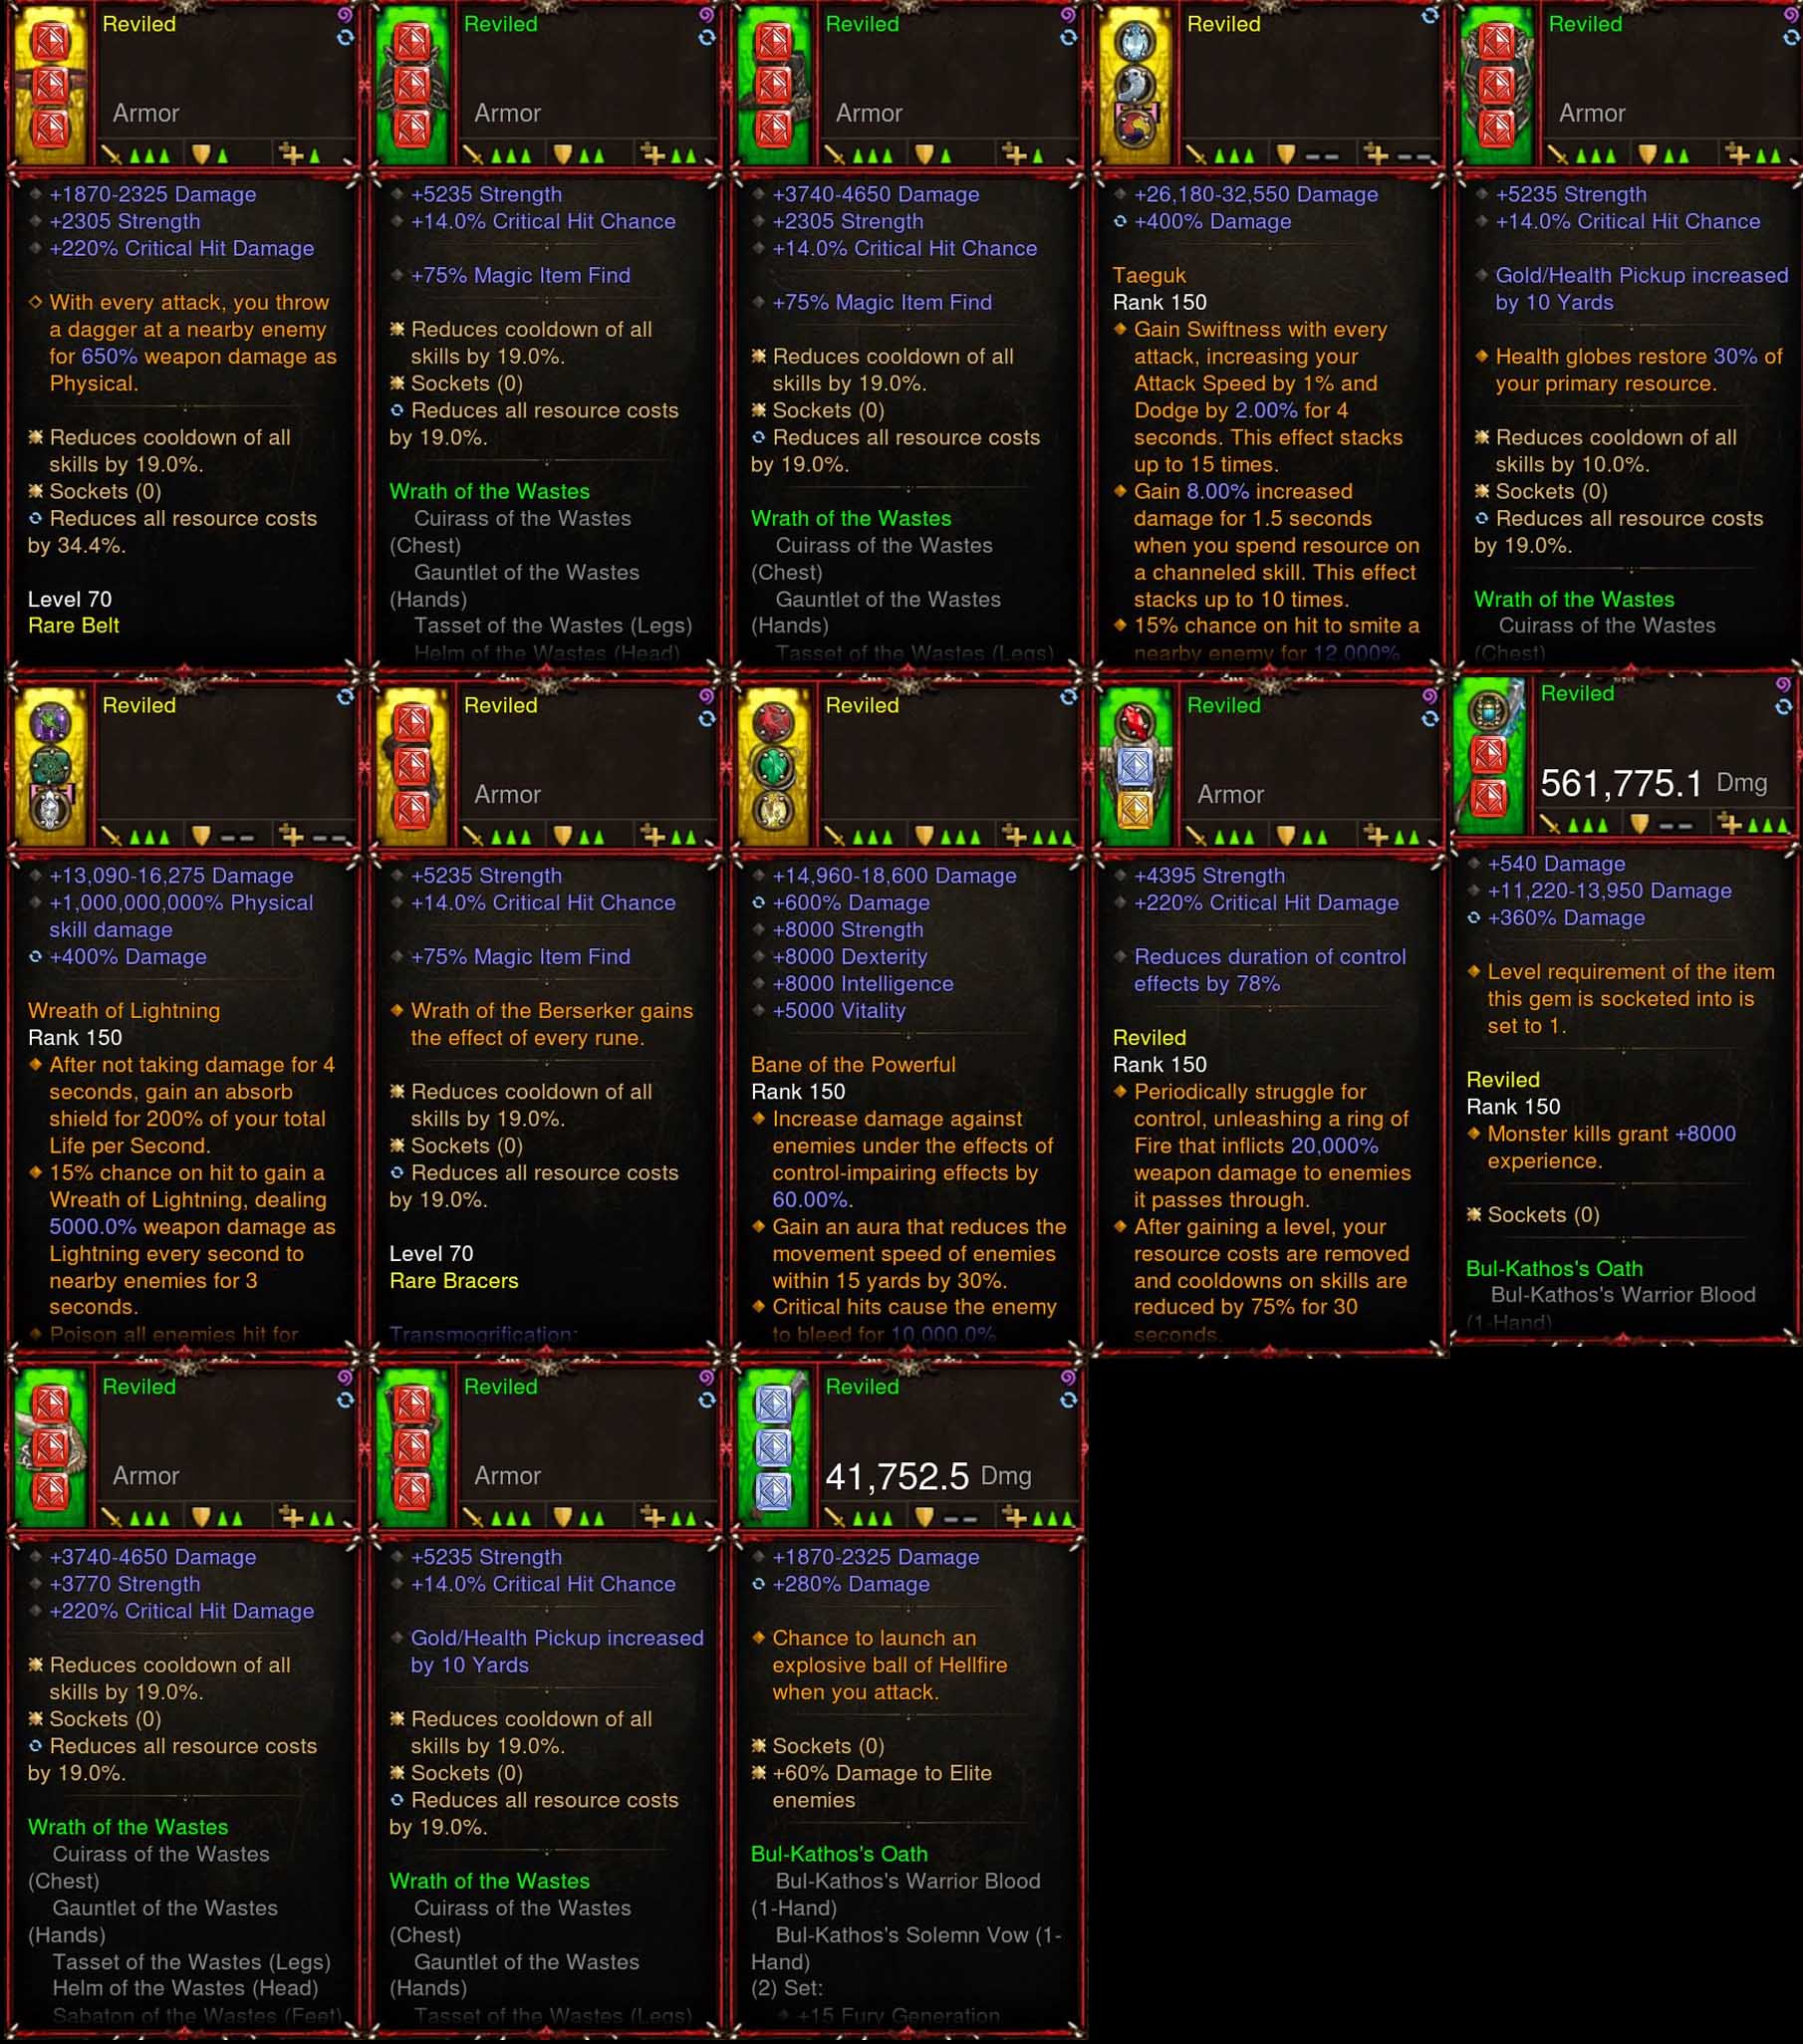 [Primal Ancient] [Quad DPS] Diablo 3 Immortal v5 Barbarian Waste gRift 150 (Magic Find, High CDR, RR) Reviled Diablo 3 Mods ROS Seasonal and Non Seasonal Save Mod - Modded Items and Gear - Hacks - Cheats - Trainers for Playstation 4 - Playstation 5 - Nintendo Switch - Xbox One